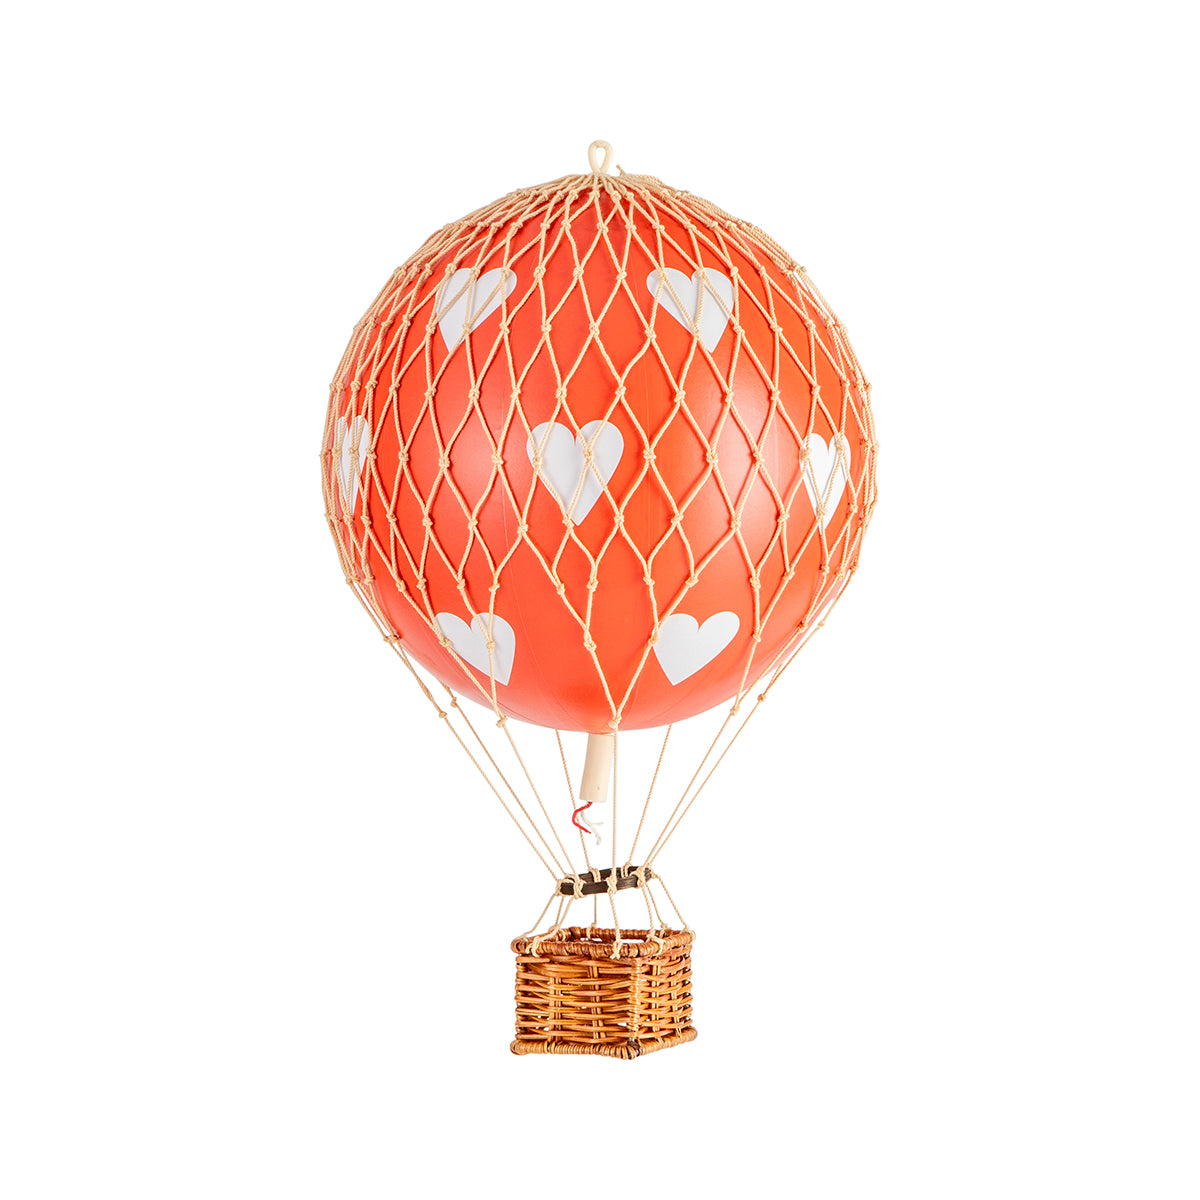 A quirky Wonderen Small Hot Air Balloon - Travels Light adorned with hearts, floating gracefully through the sky.